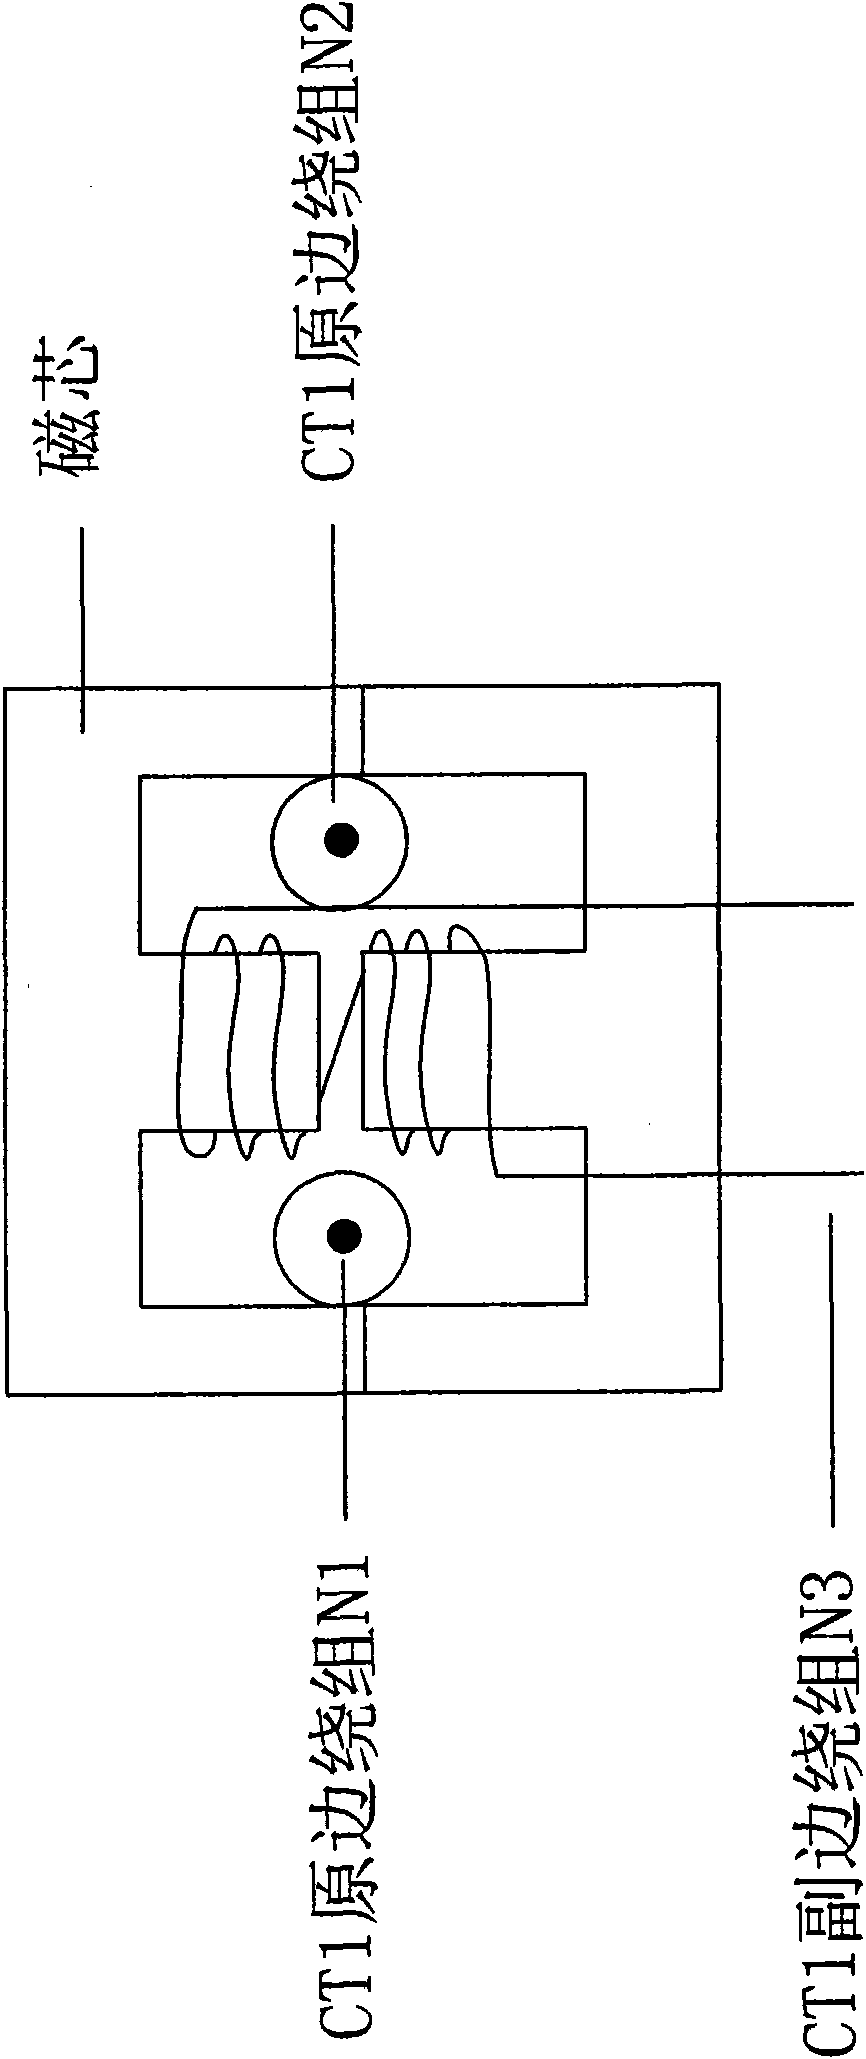 Synchronous rectification driving circuit suitable for central tapped structure rectifying circuit